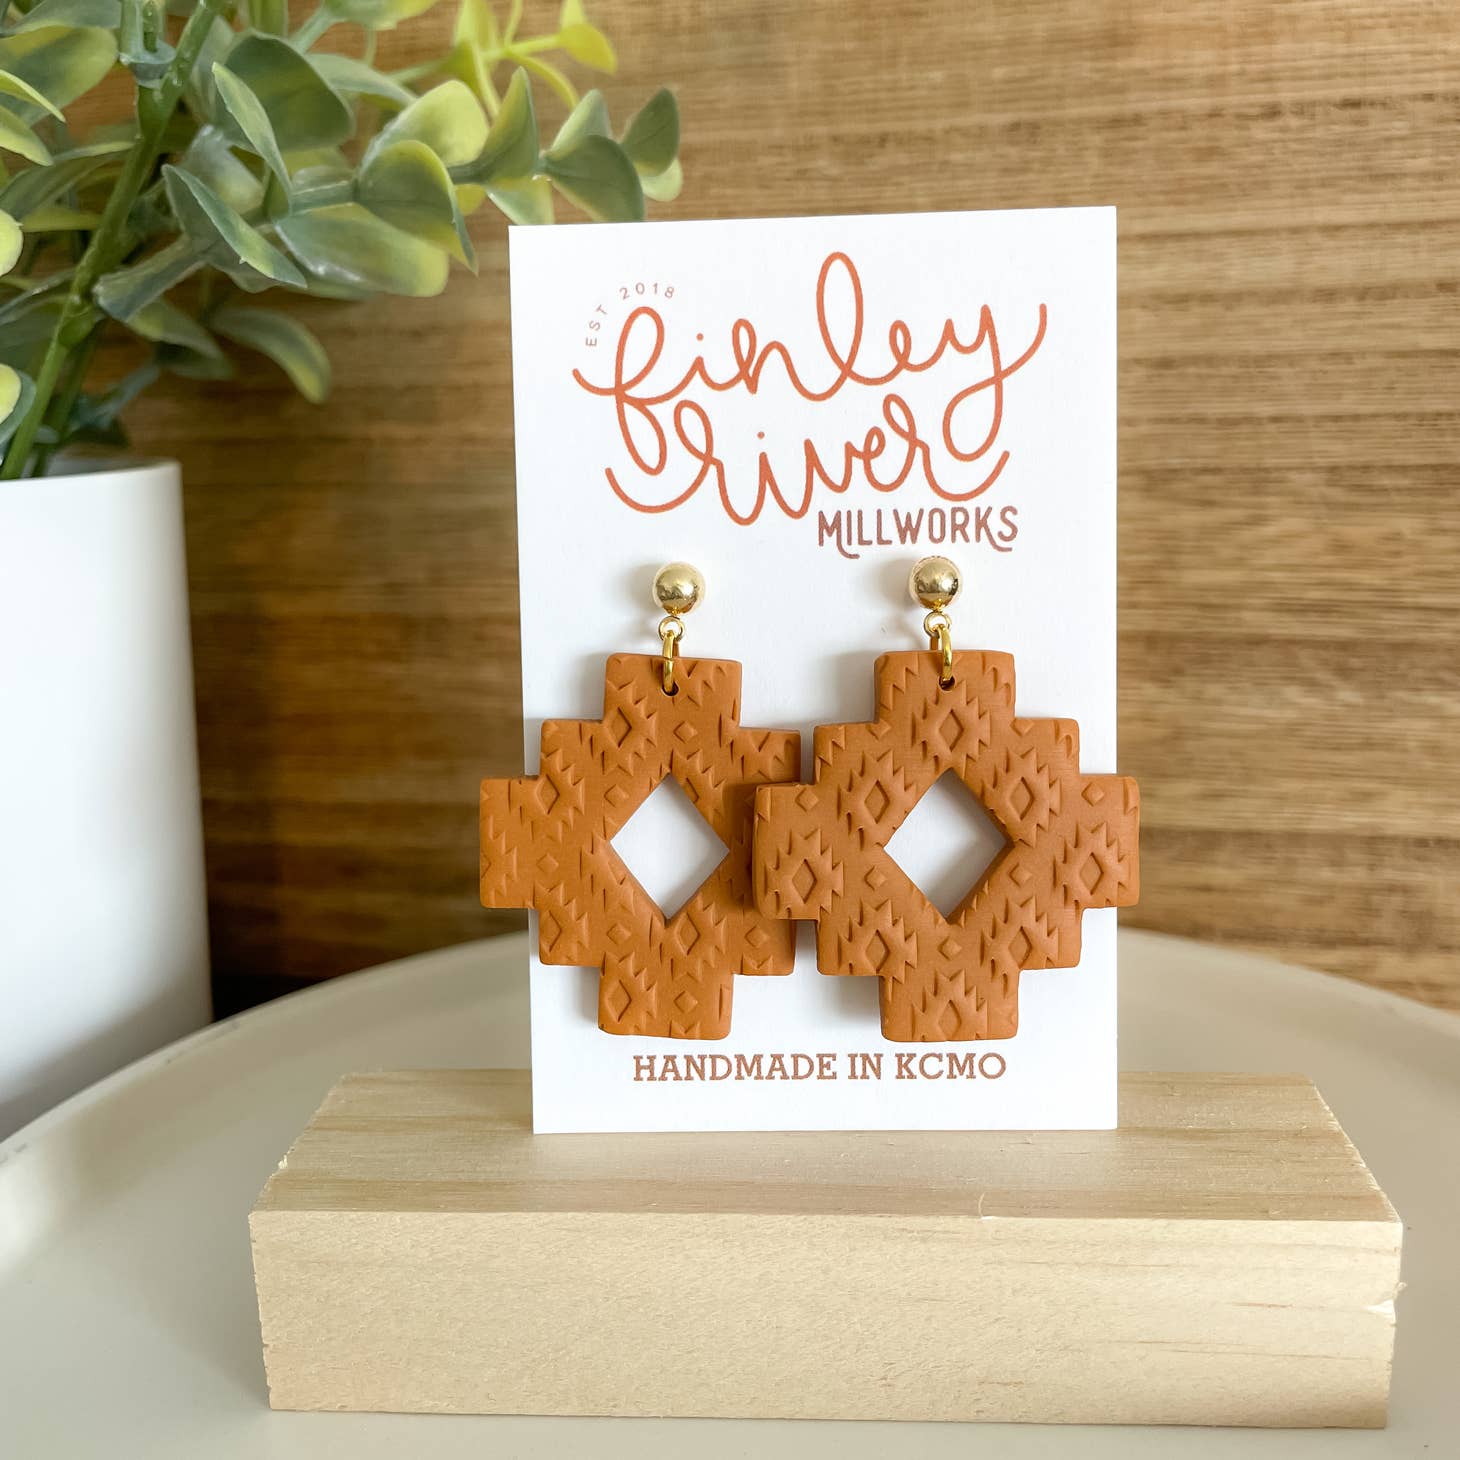 Aztec Clay Earrings - Storm and Sky Shoppe - Finley River Millworks